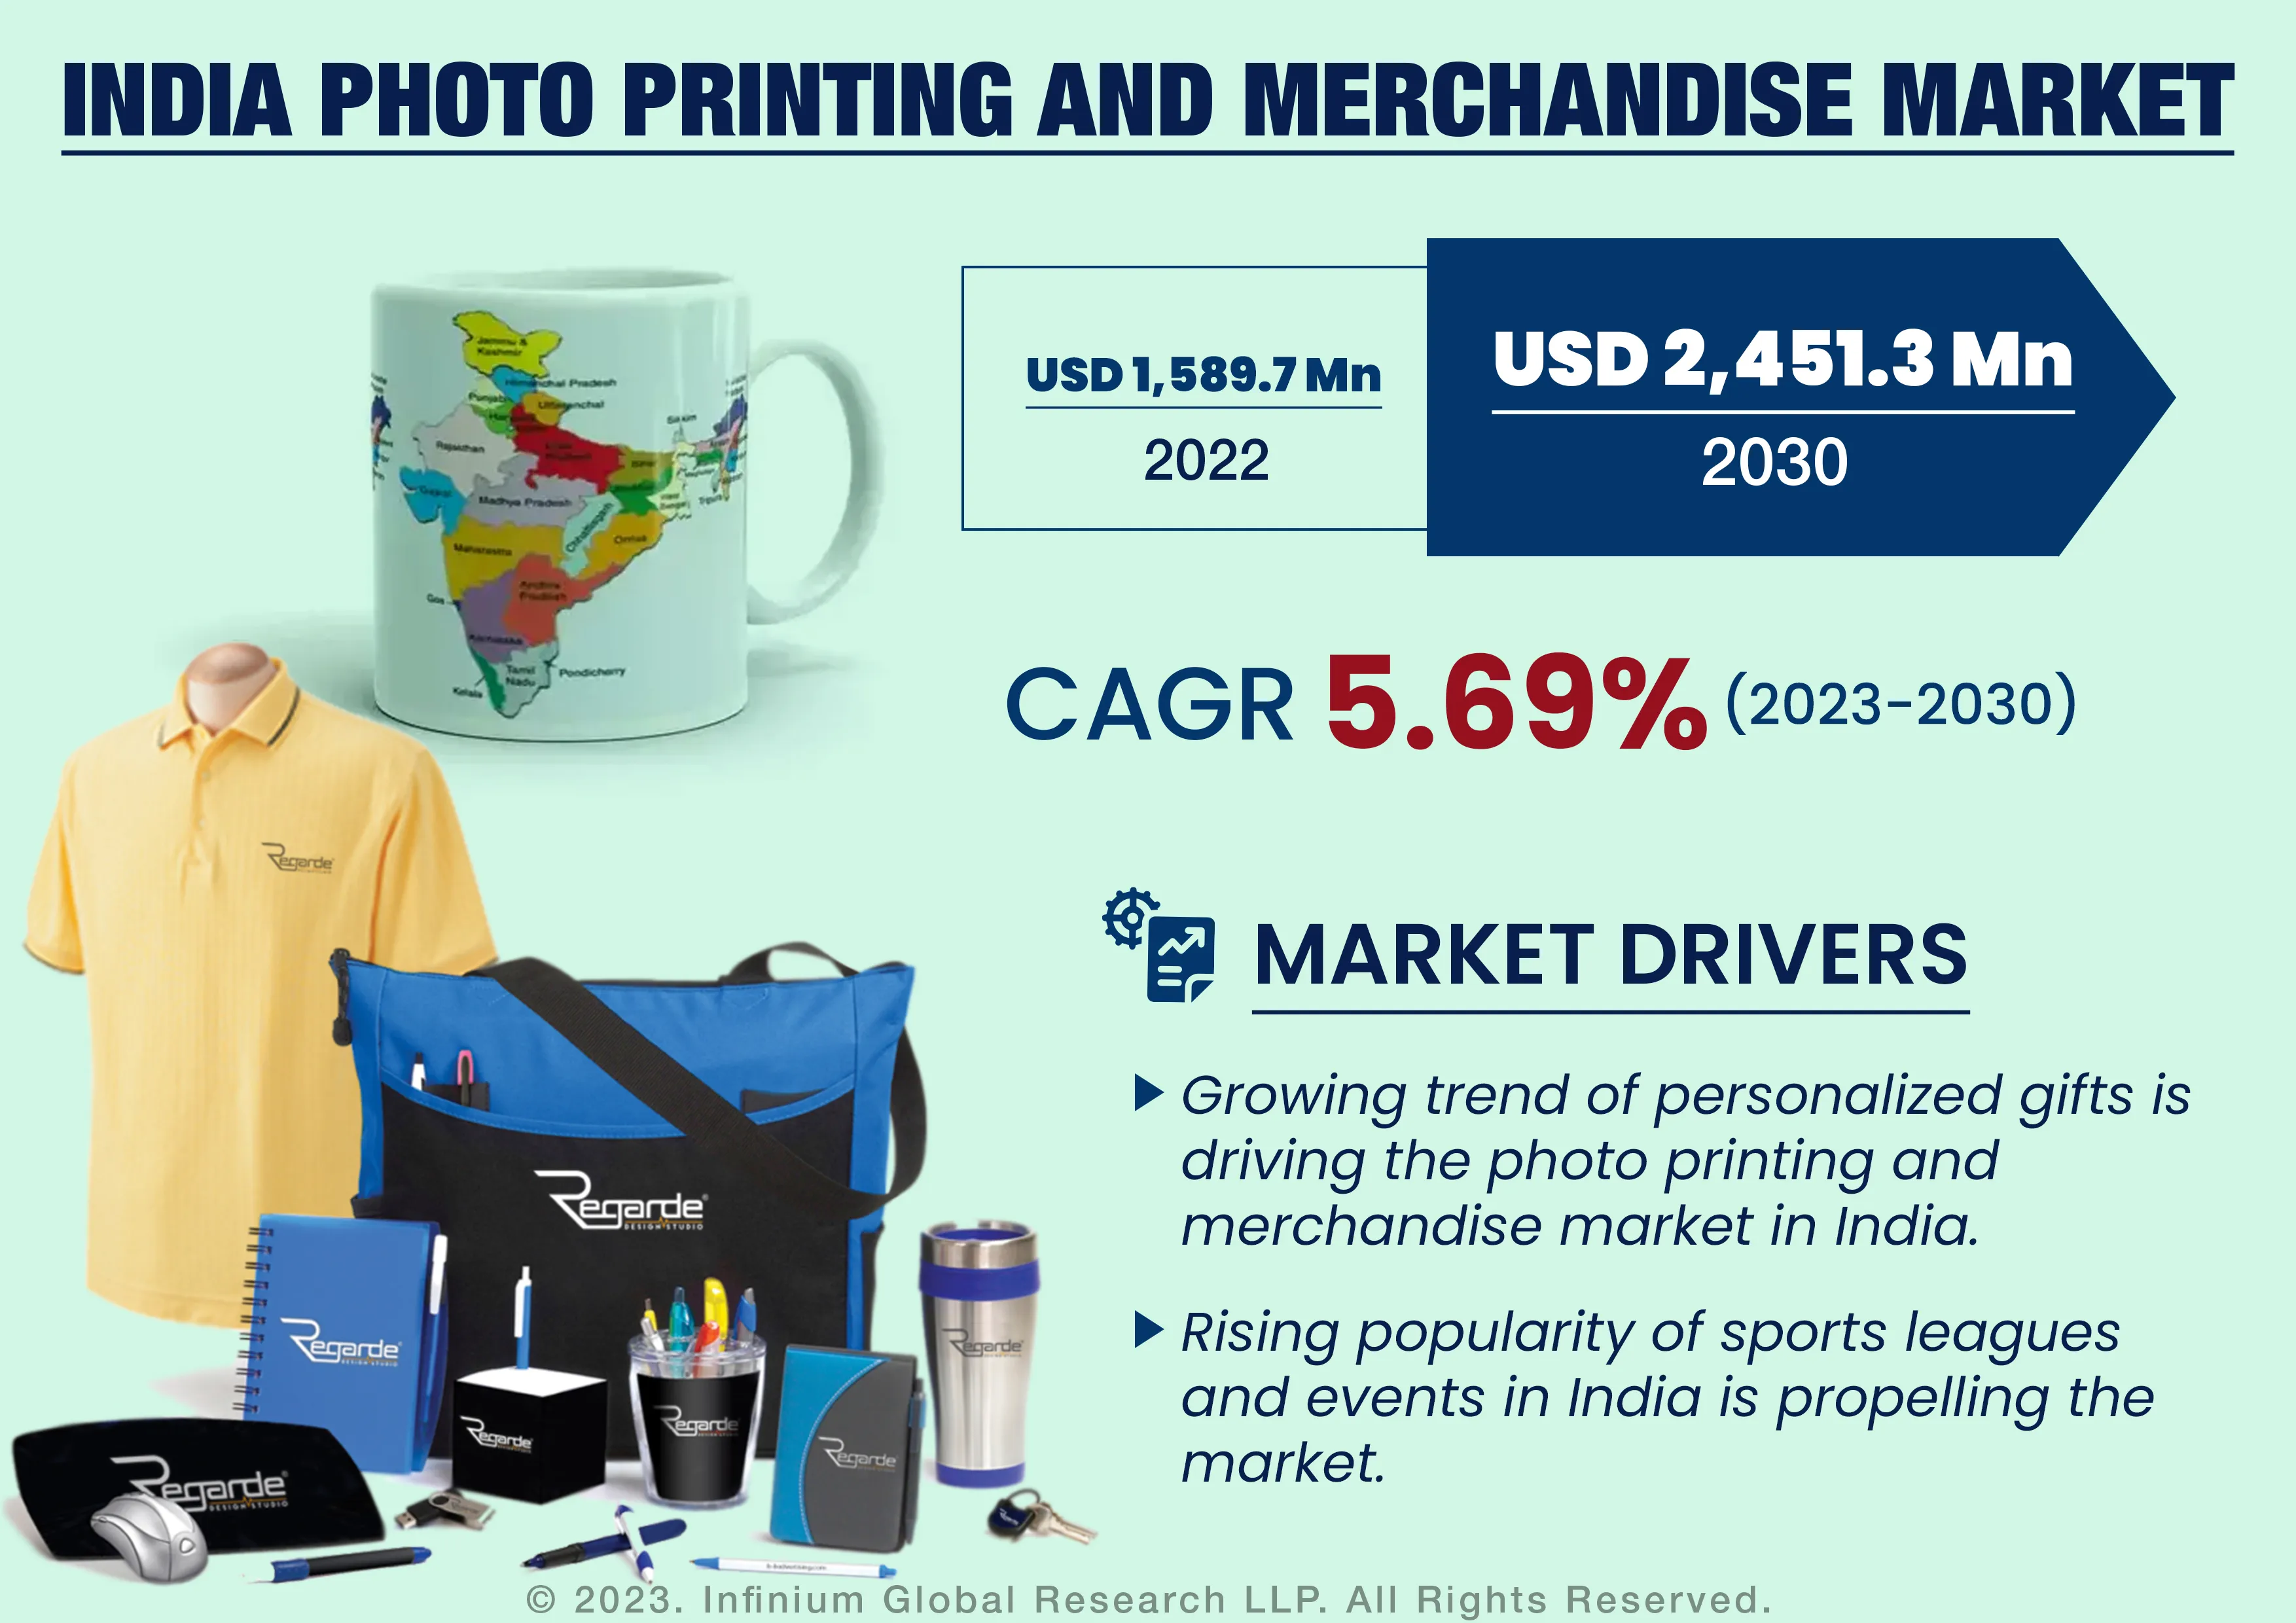 Infograph - India Photo Printing and Merchandise Market was Valued at USD 1,589.7 Million in 2022 and